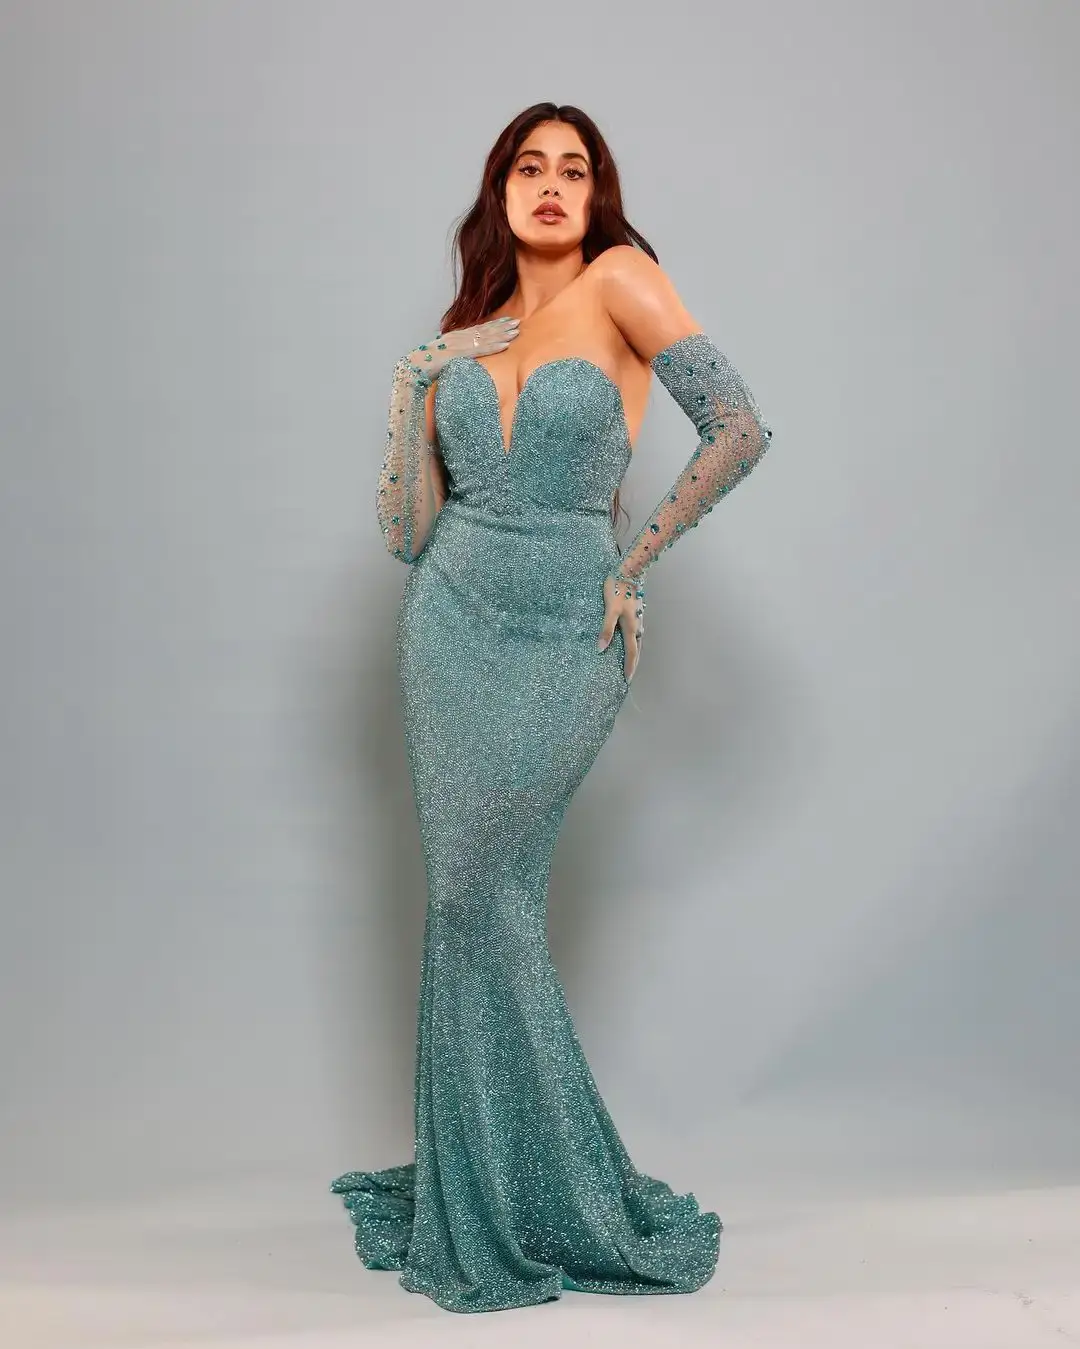 JANHVI KAPOOR STUNNING LOOKS IN LONG BLUE GOWN 9